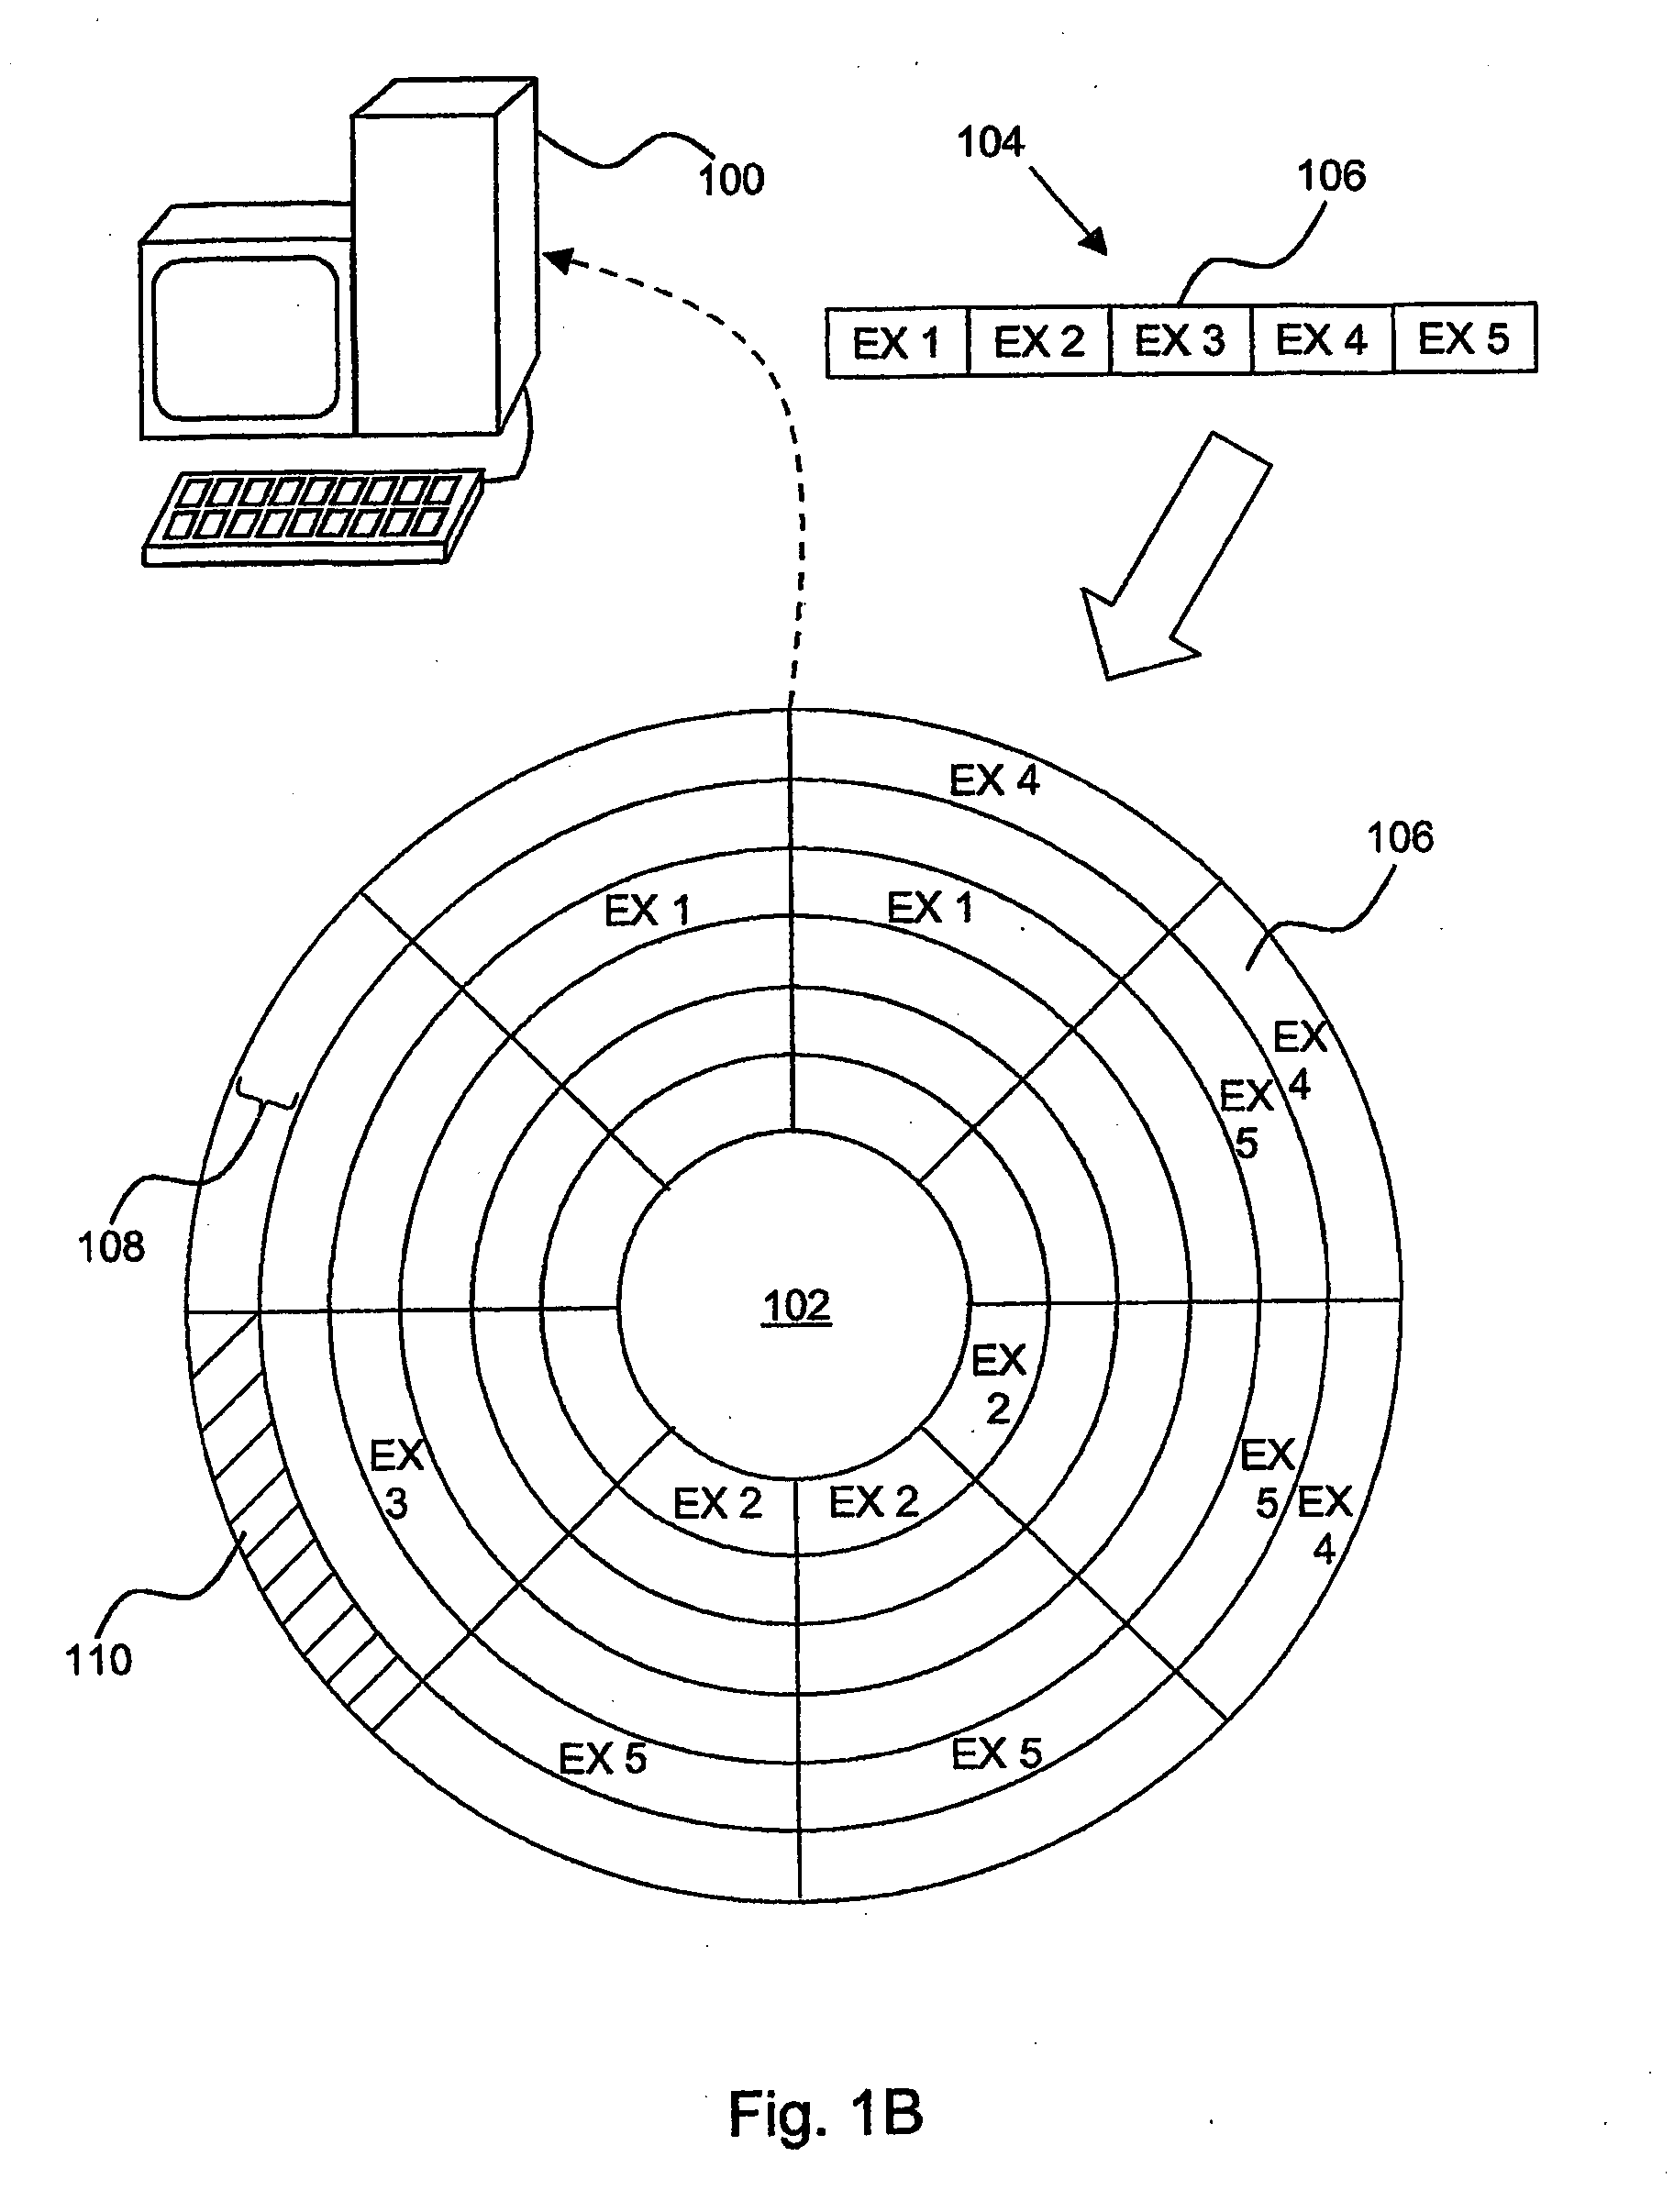 Measuring fragmentation on direct access storage devices and defragmentation thereof